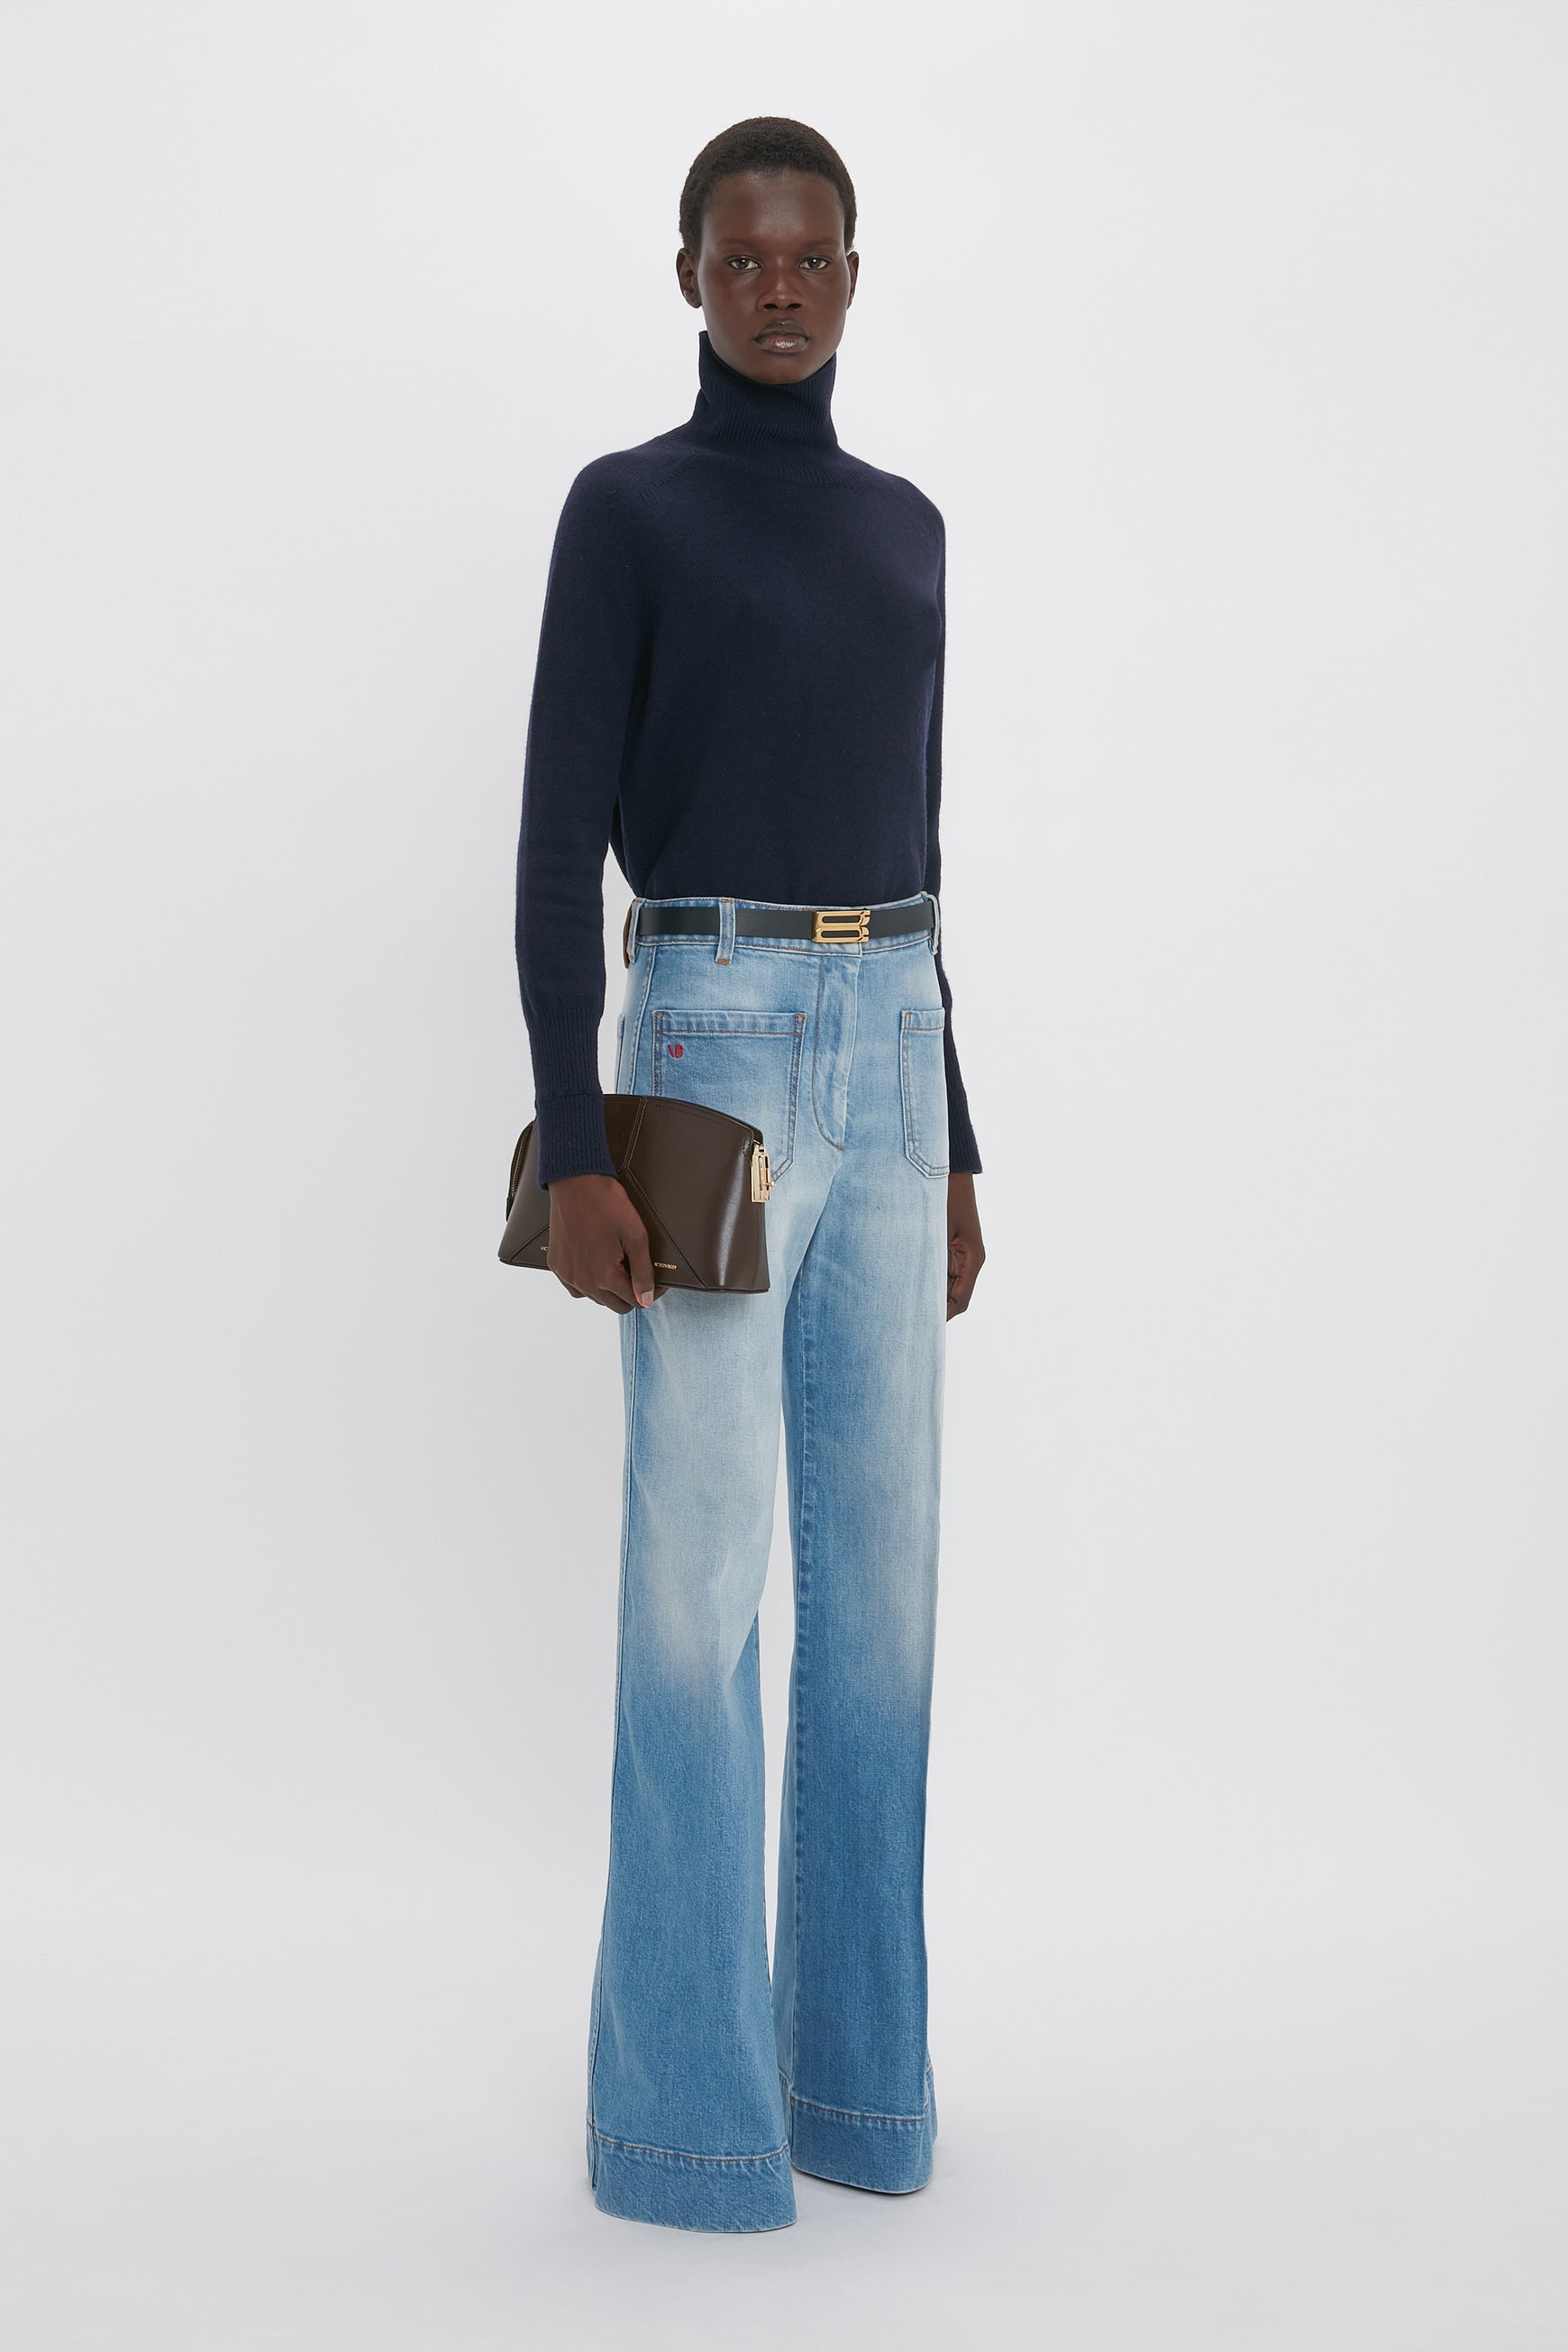 Person standing against a plain white background, wearing a dark turtleneck, Alina High Waisted Jean In Light Summer Wash by Victoria Beckham, and holding a brown clutch.